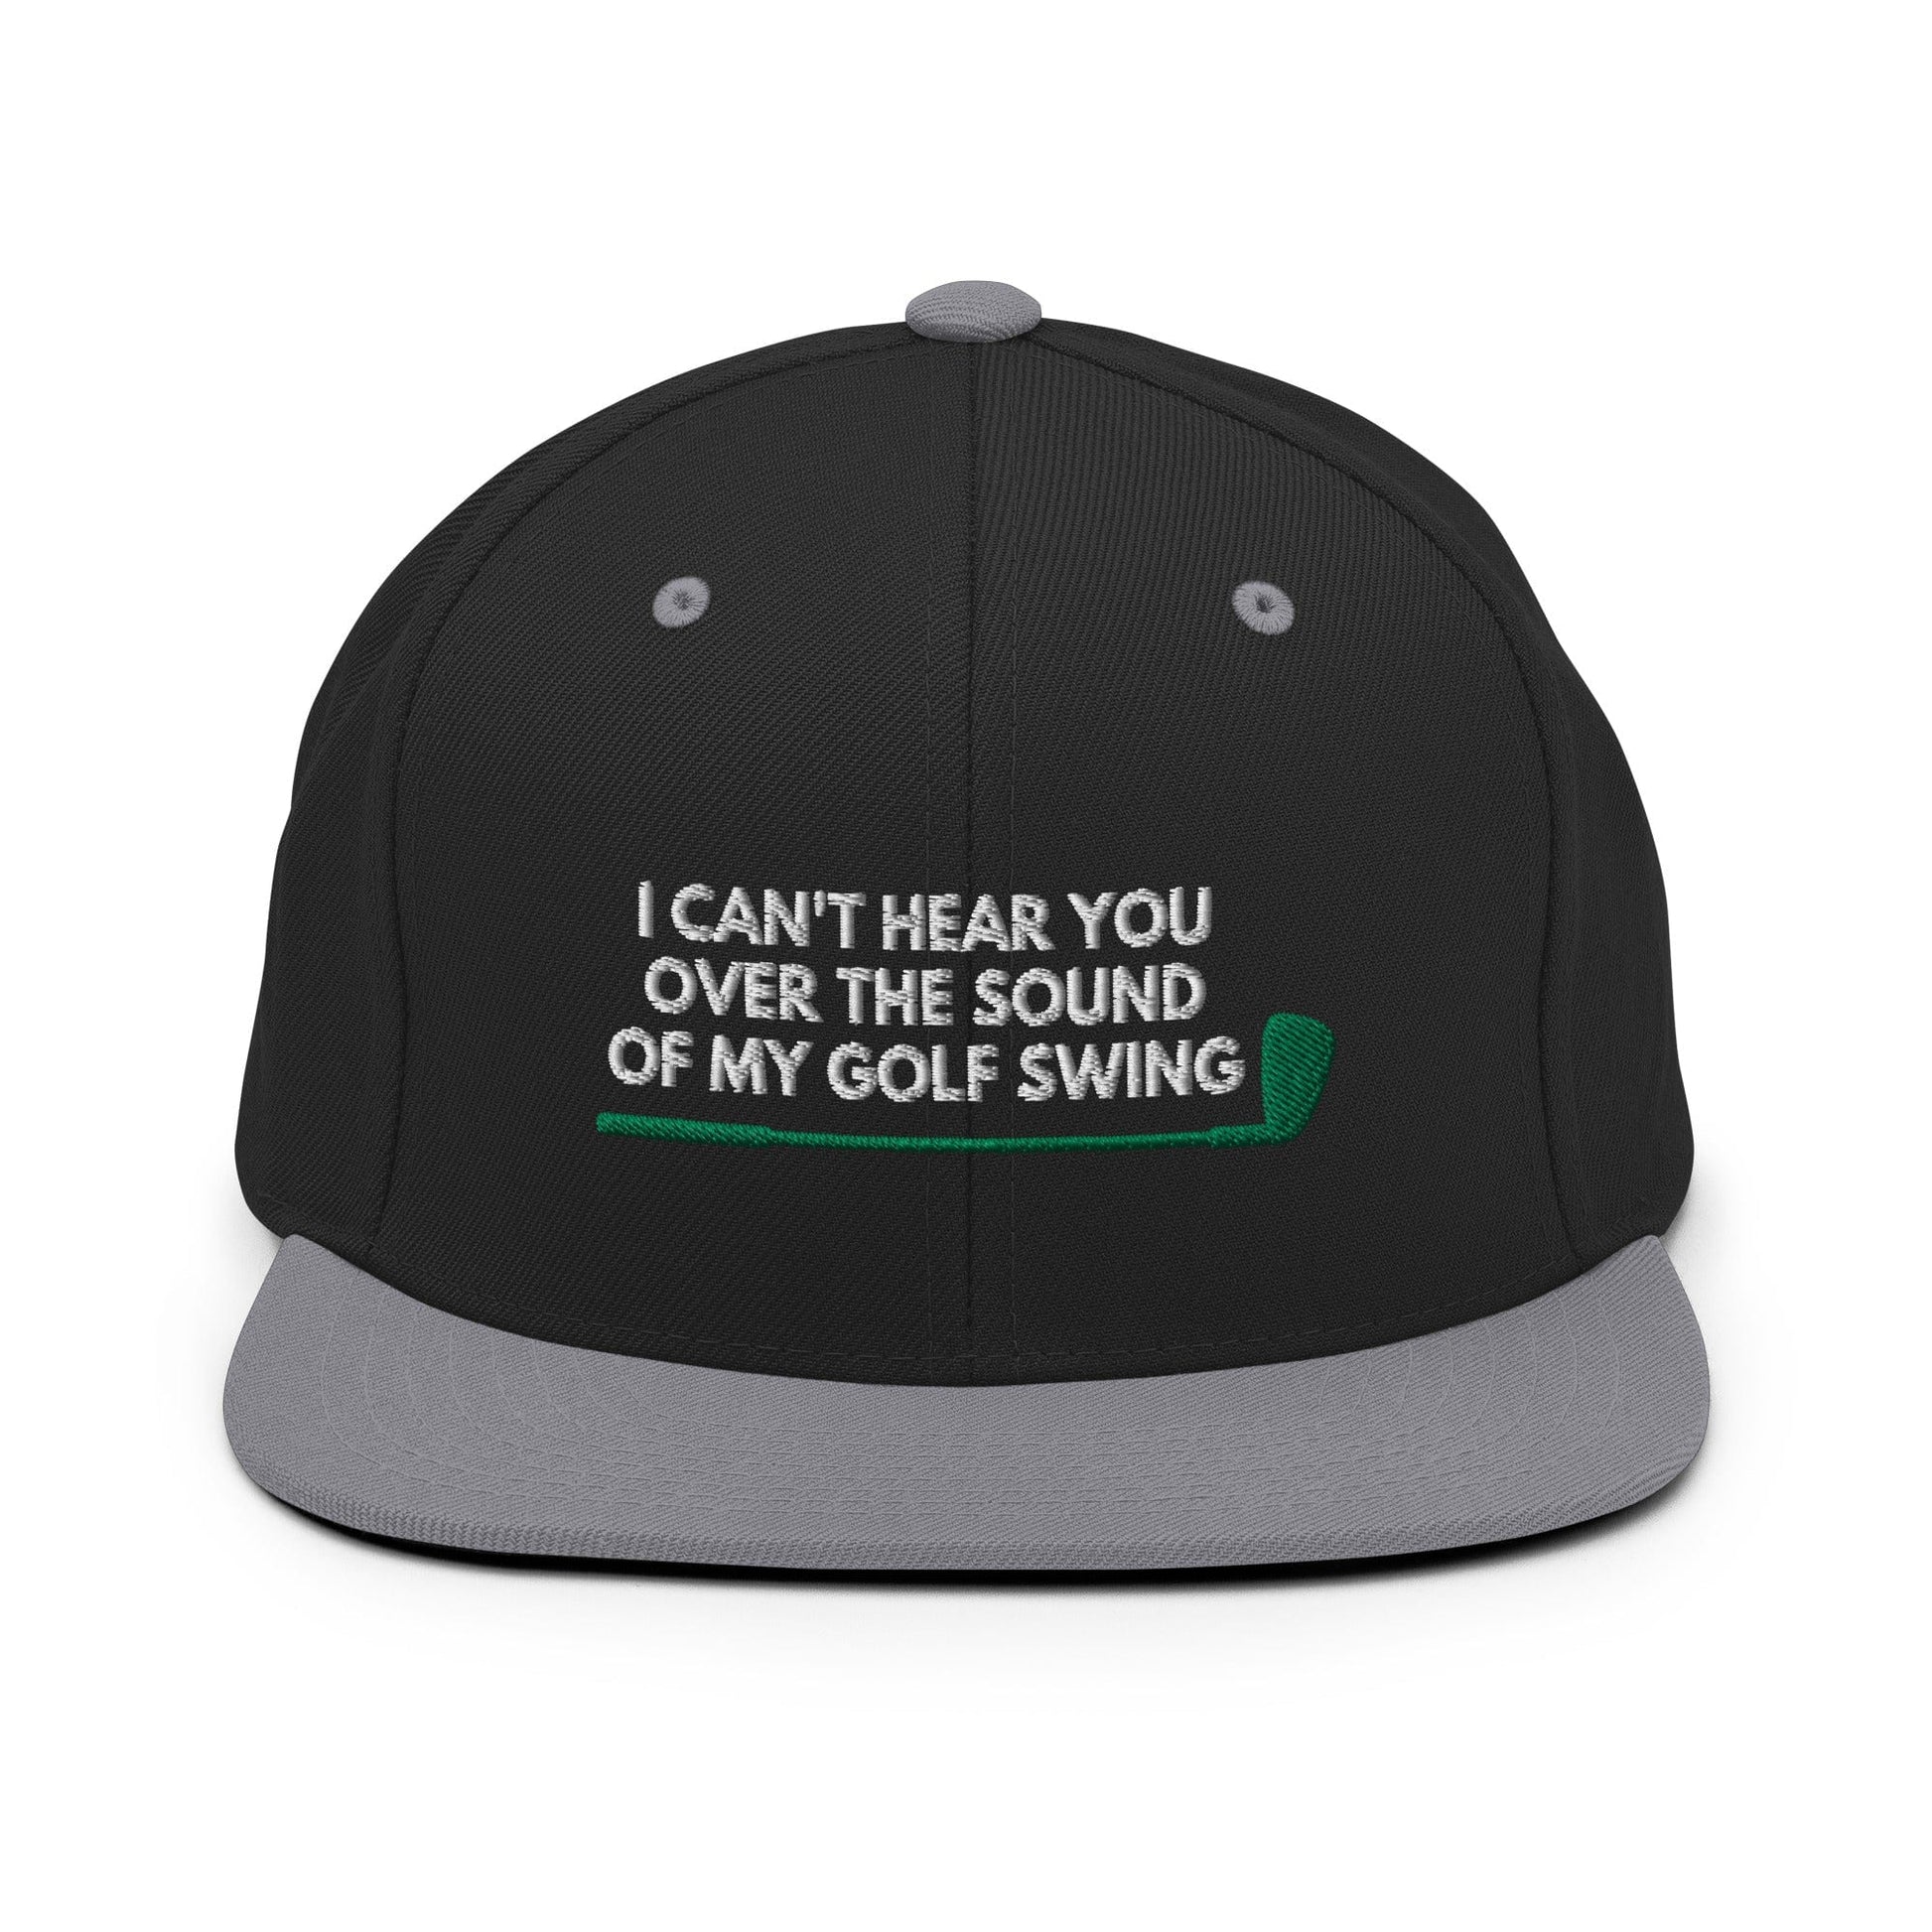 Funny Golfer Gifts  Snapback Hat Black/ Silver I Cant Hear You Over The Sound Of My Golf Swing Hat Snapback Hat